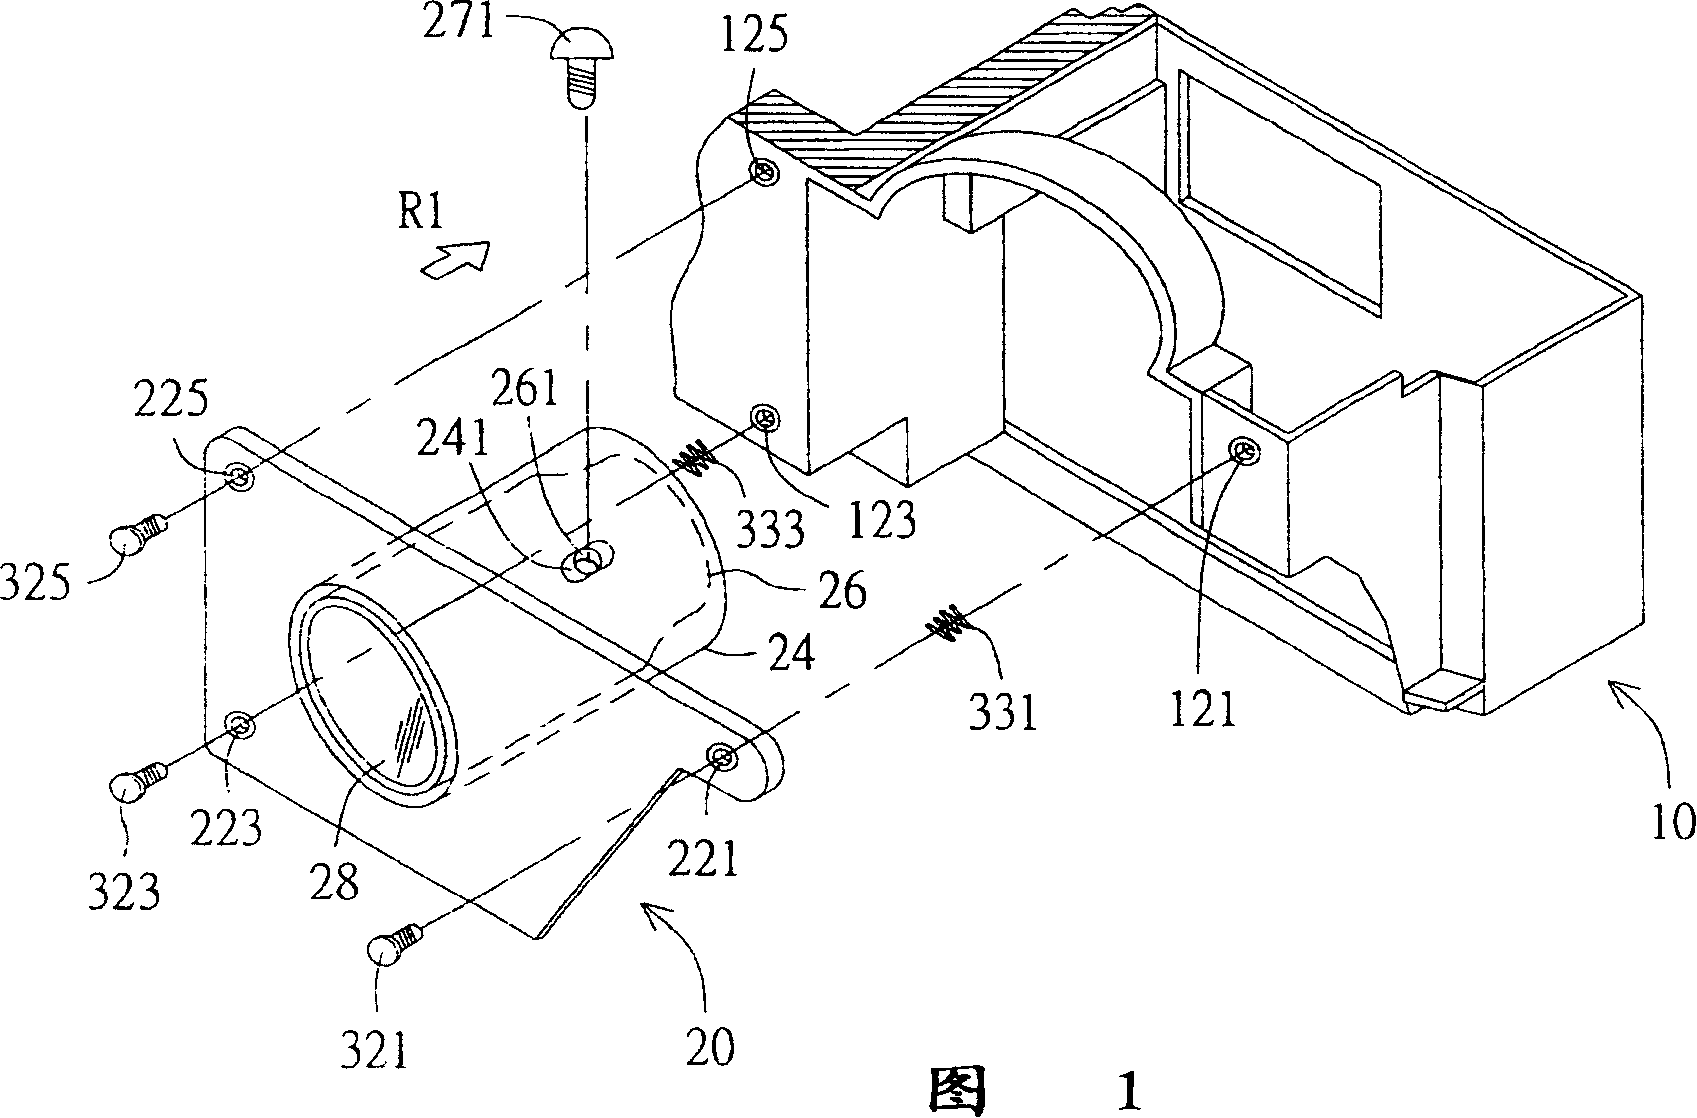 Projection apparatus and its lens adjusting mechanism